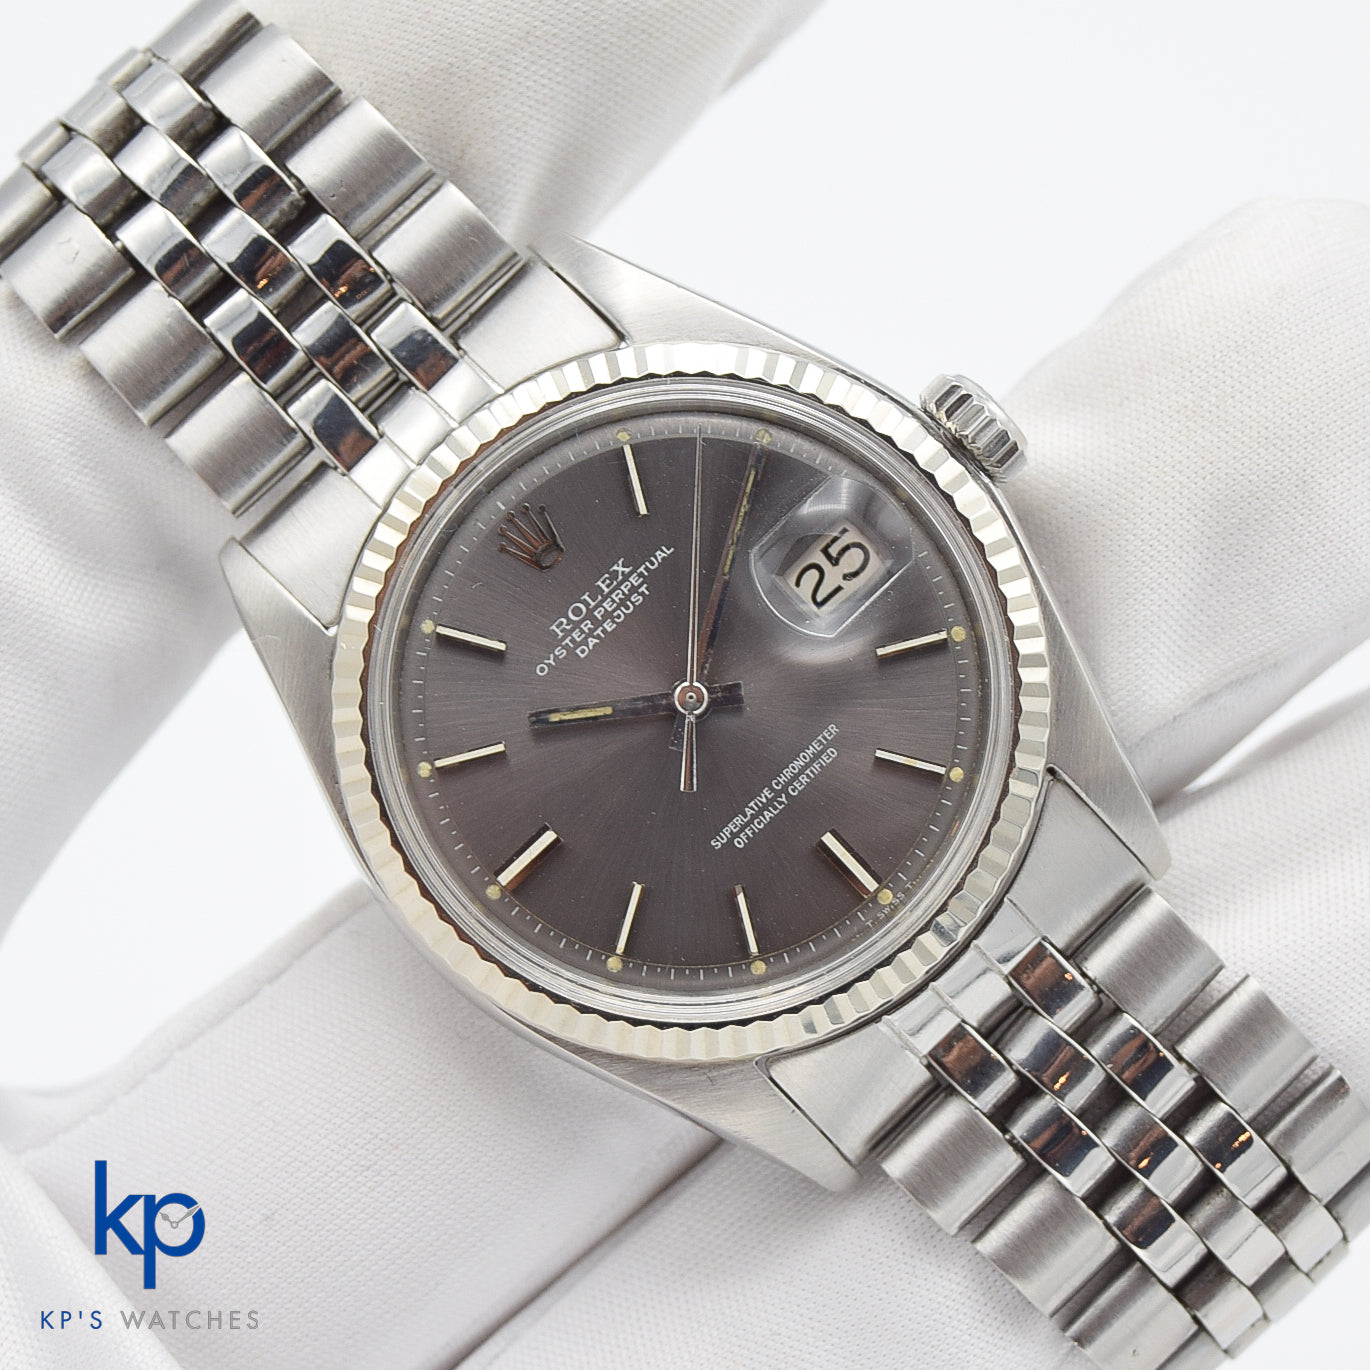 1971 Rolex Oyster Perpetual Datejust 1601